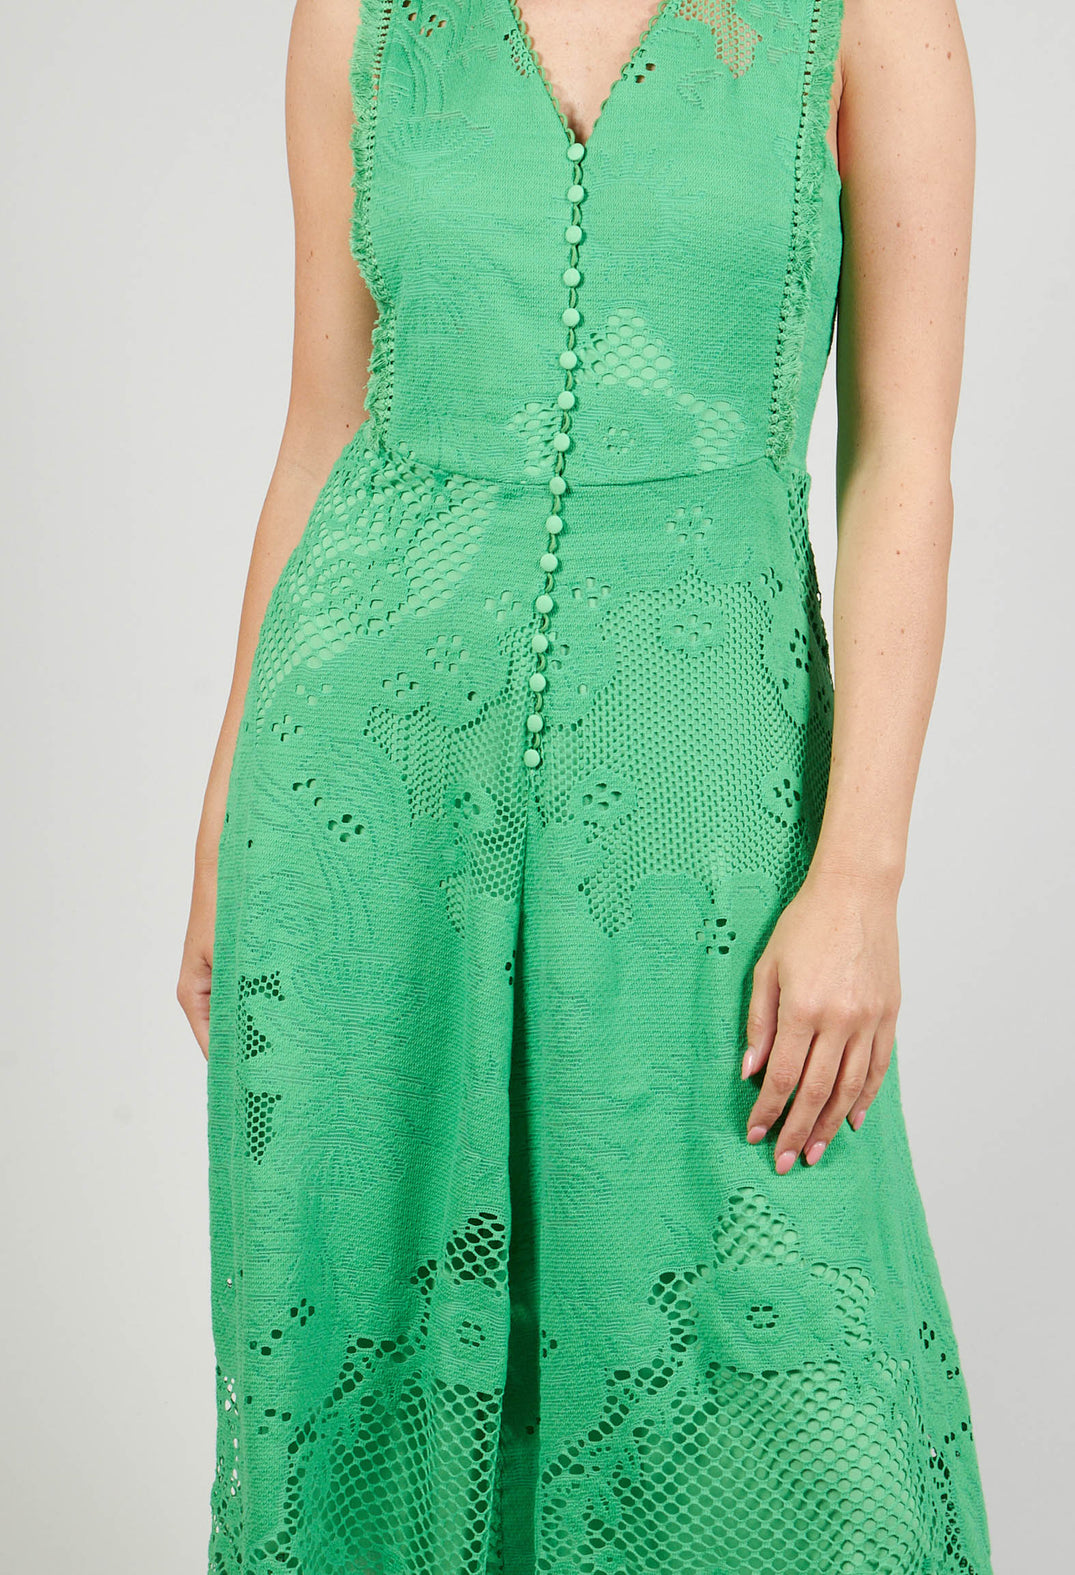 Sleeveless Dress with Lace Overlay in Flash Green